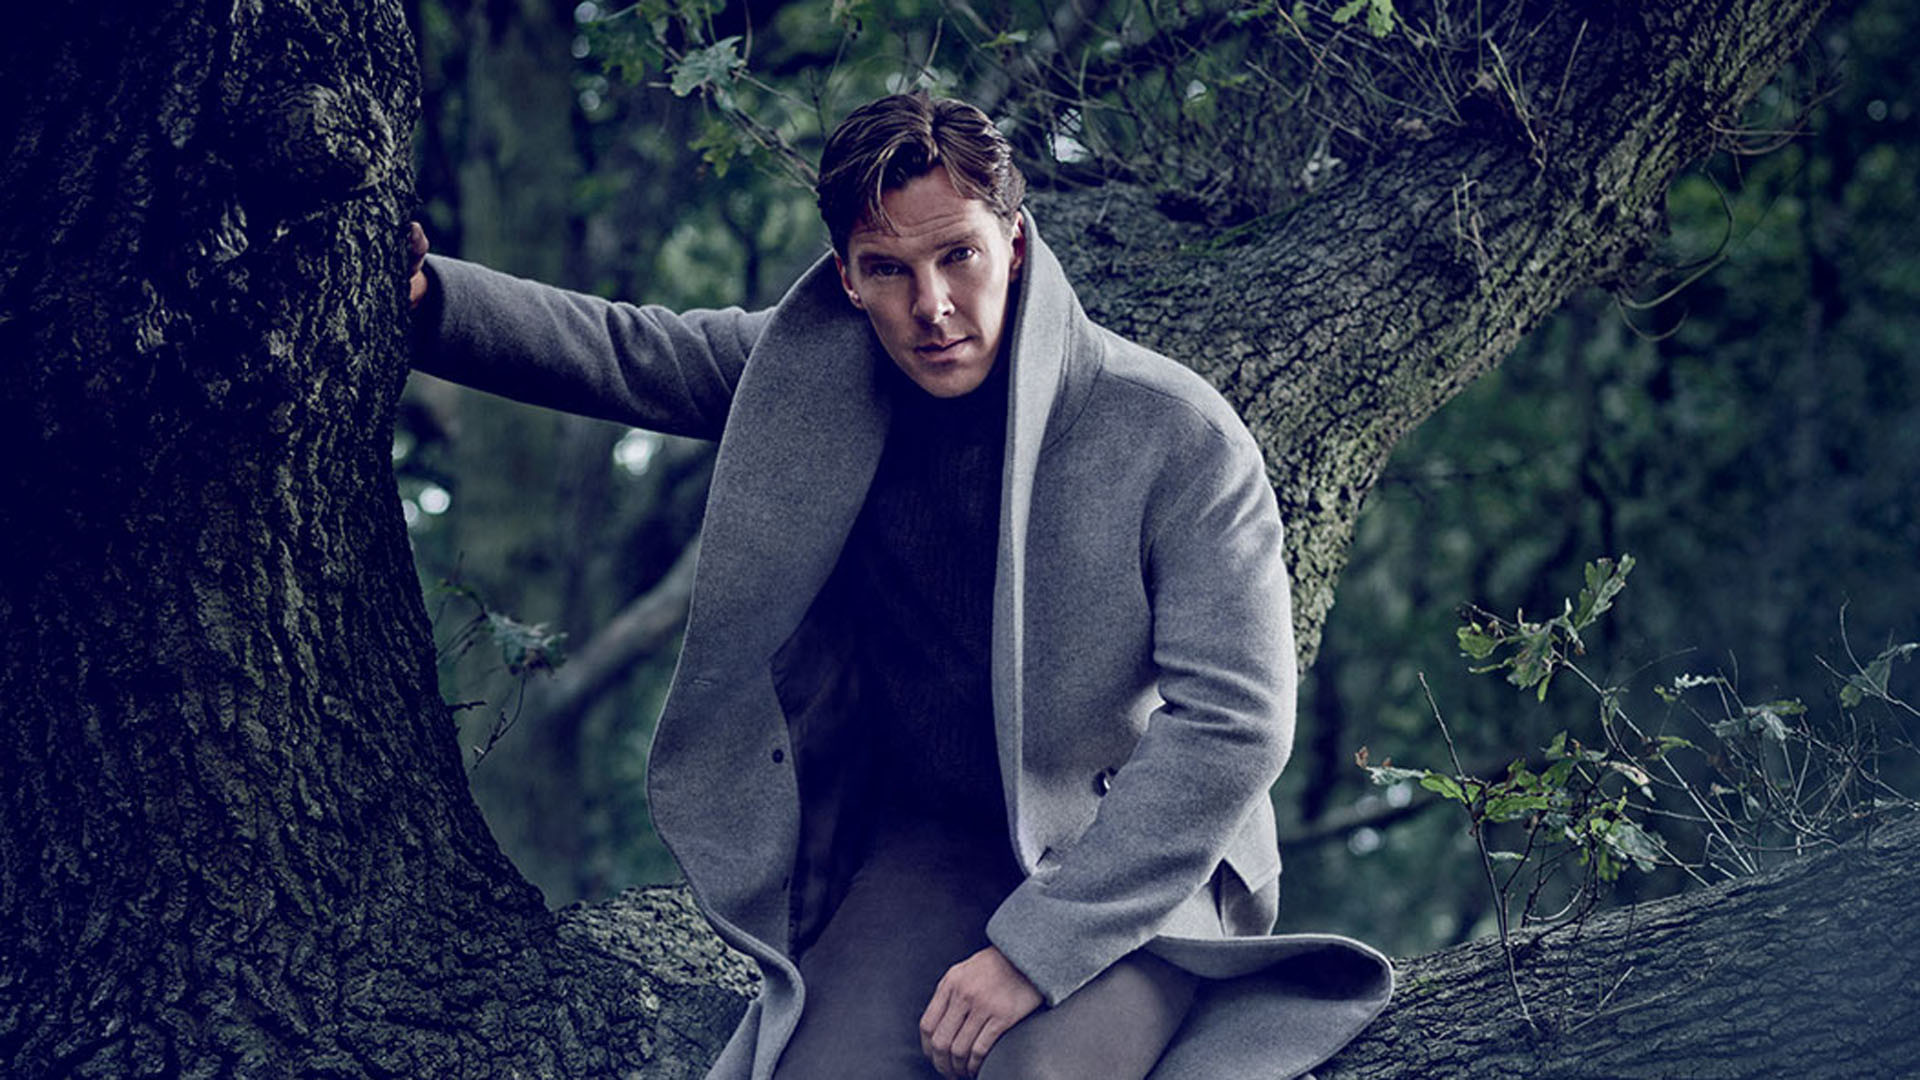 Benedict Cumberbatch Wallpaper Pictures On Greepx